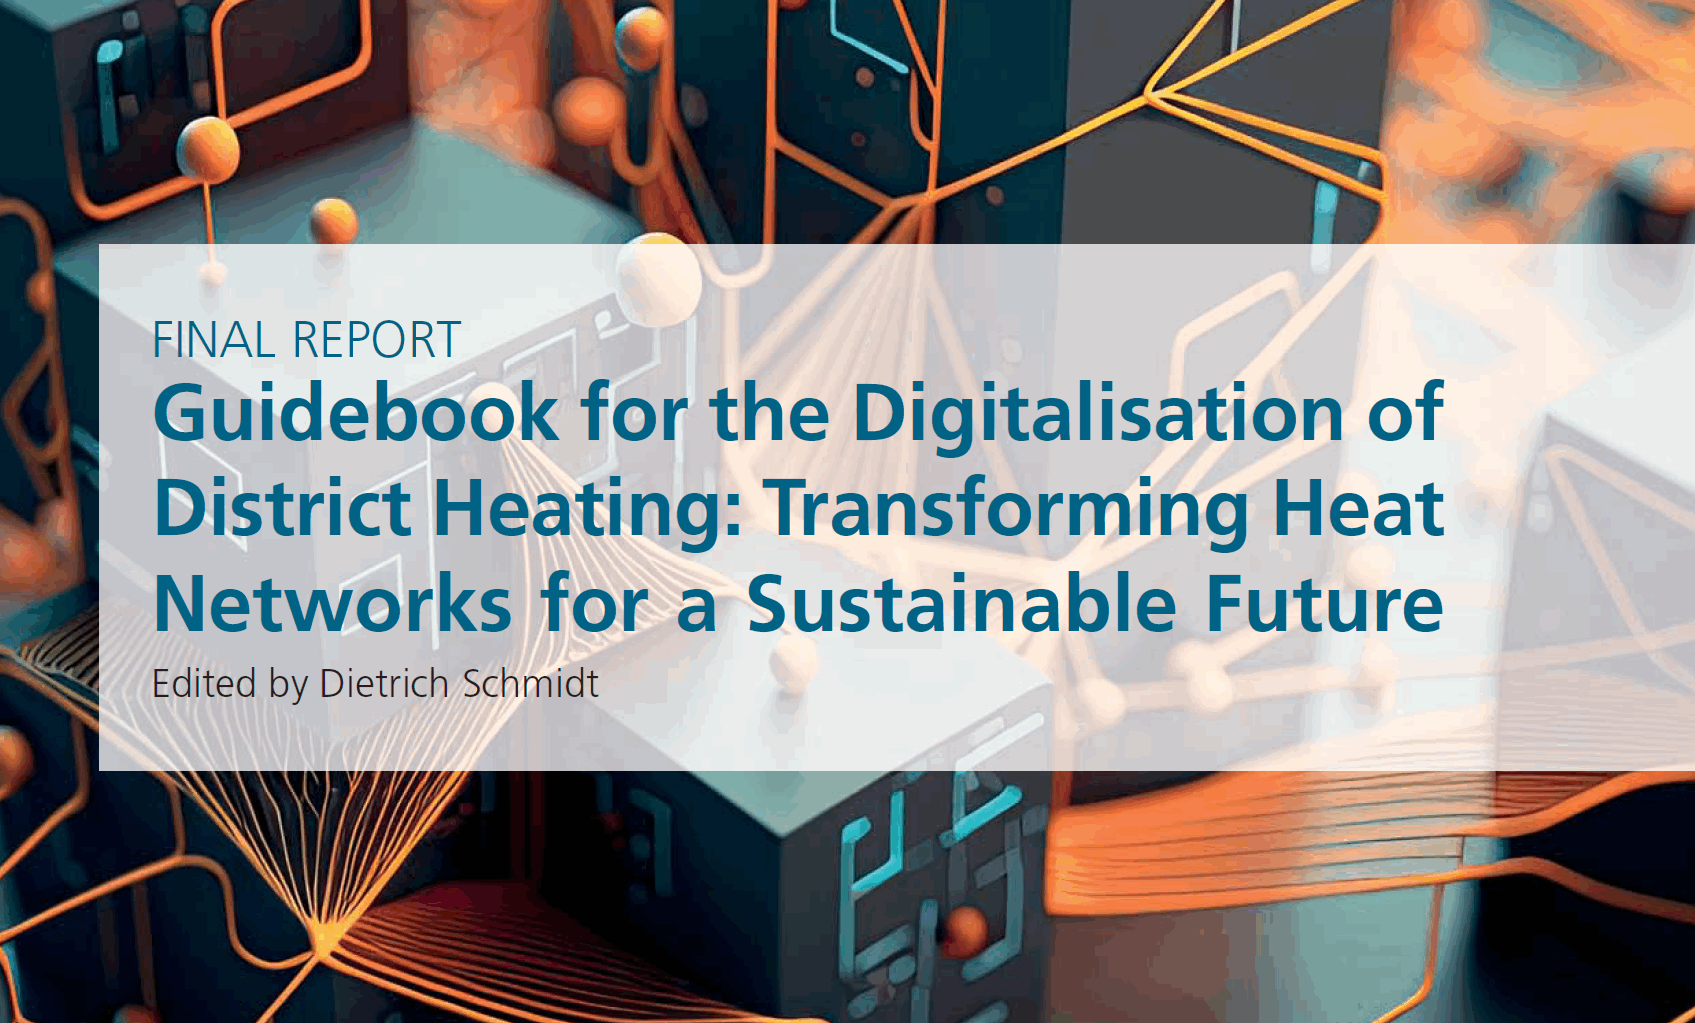 Guidebook for the Digitalisation of District Heating: Transforming Heat Networks for a Sustainable Future